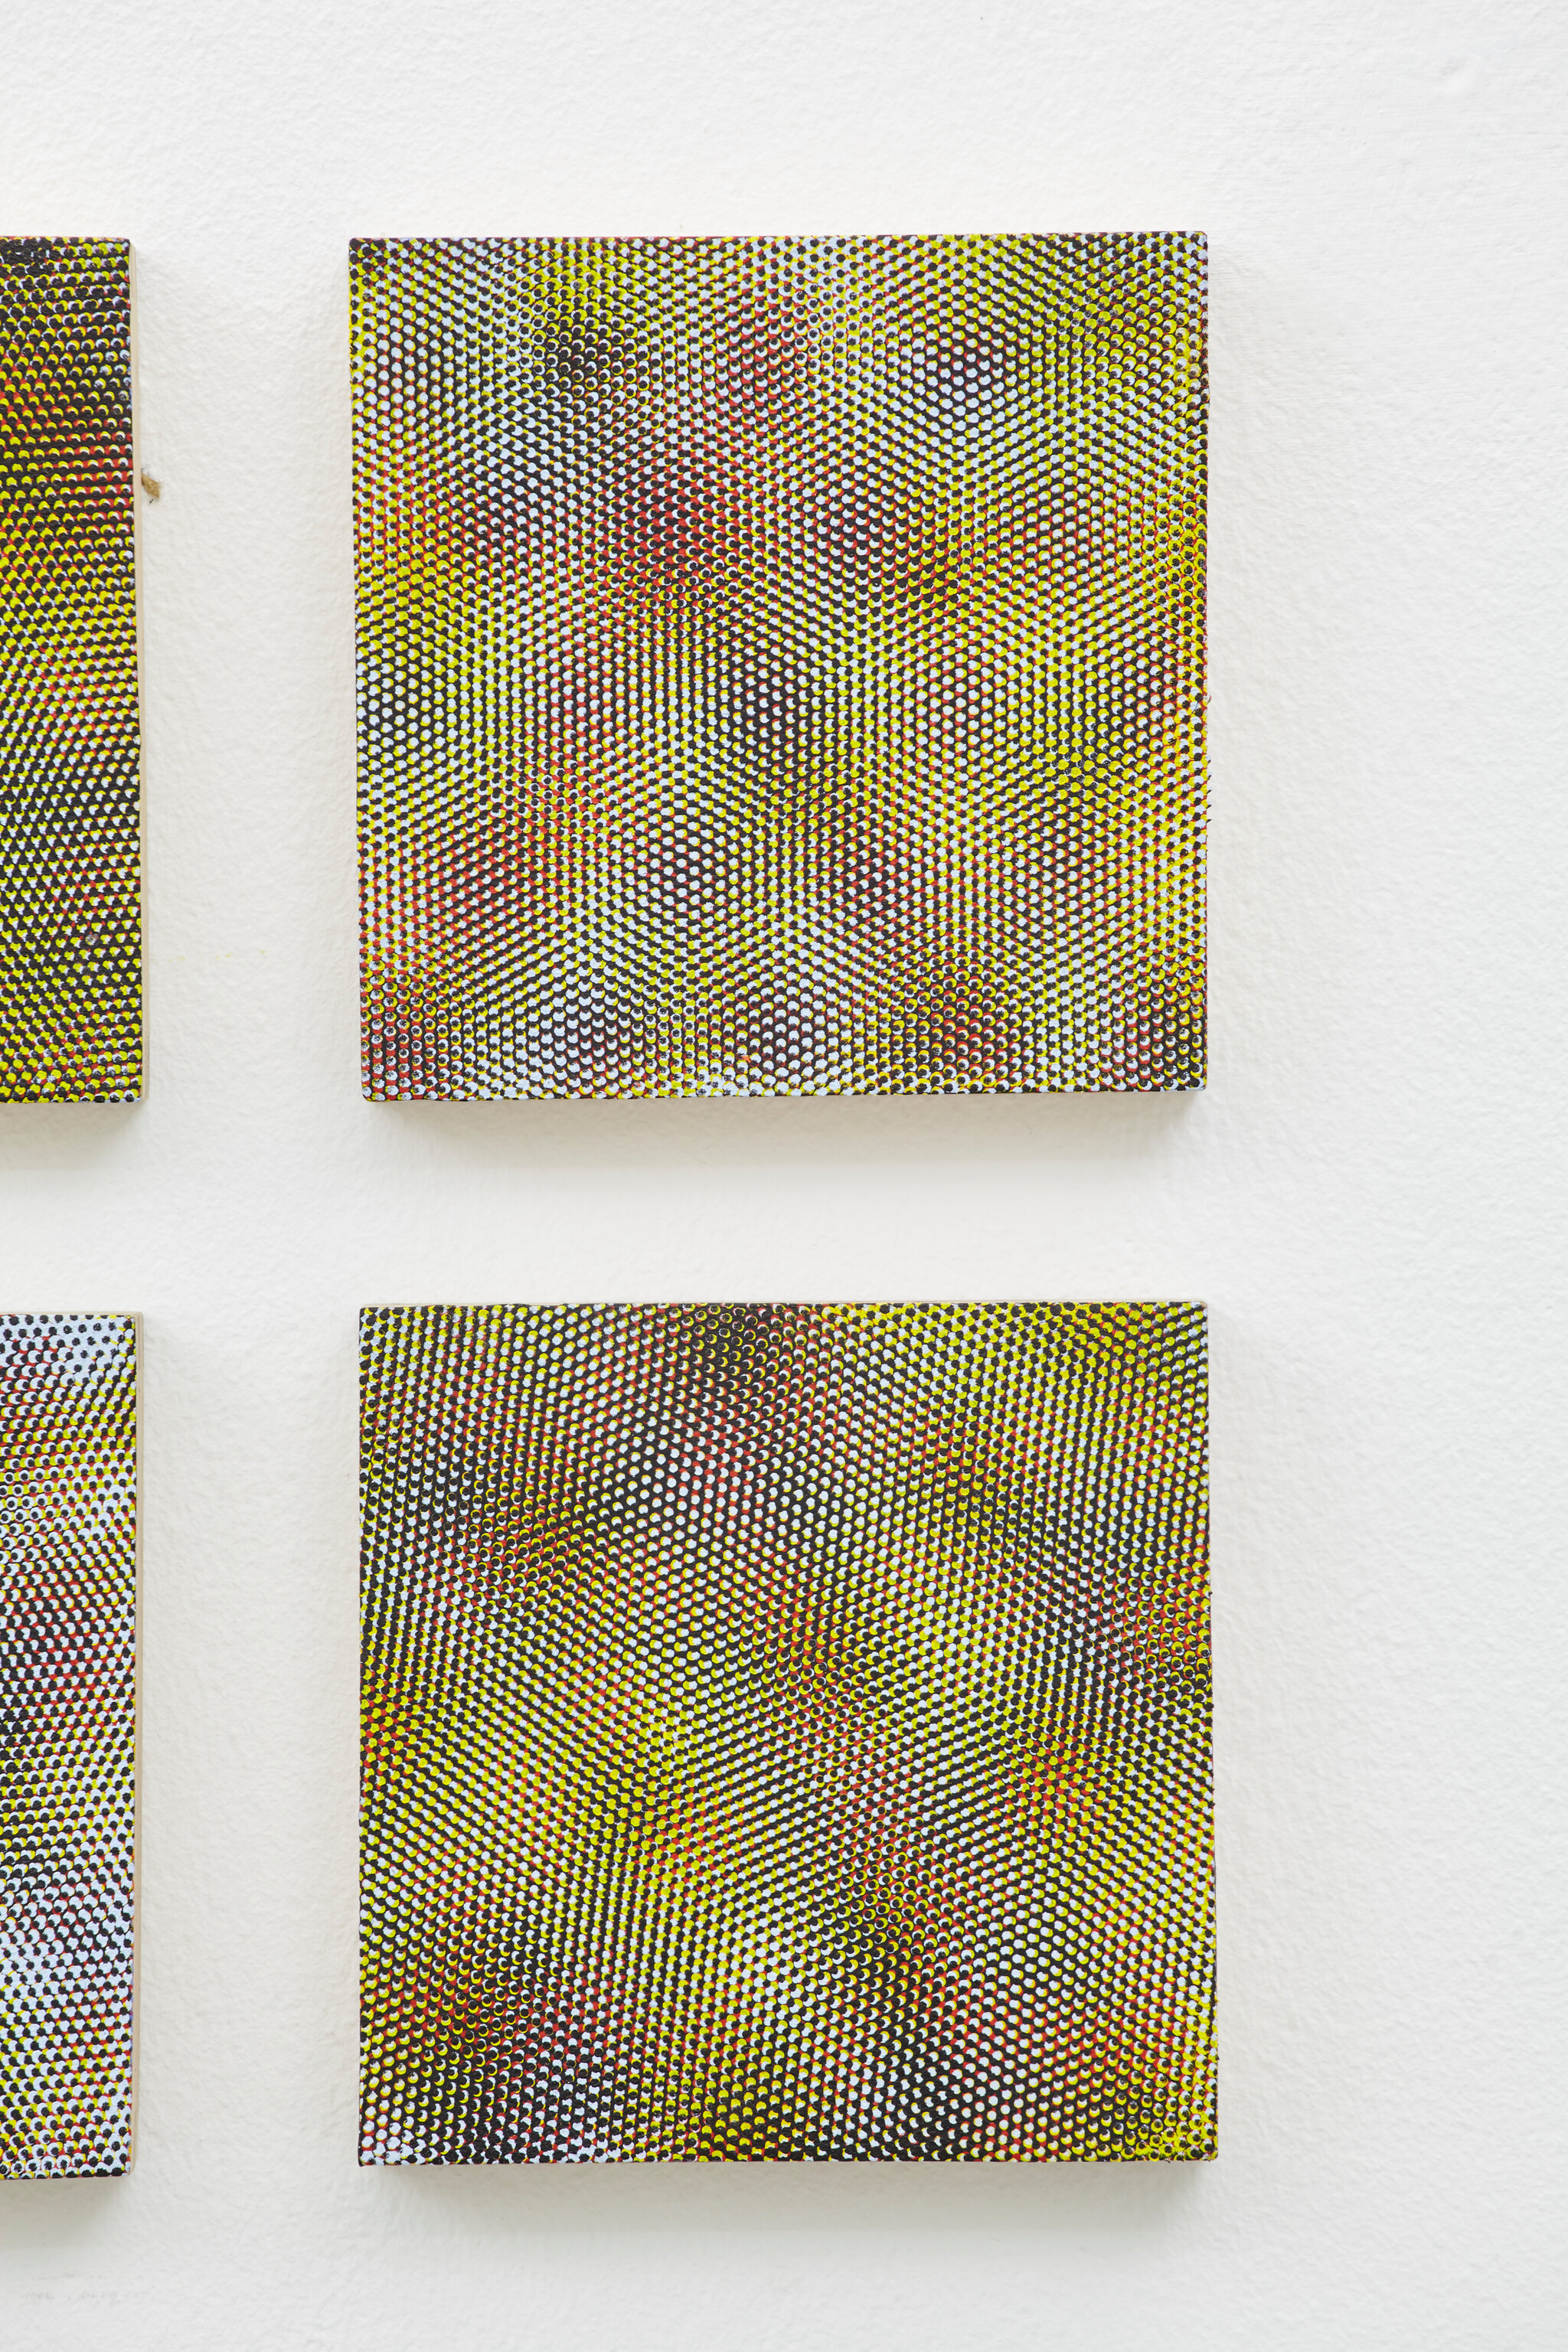 Julie Oppermann, Details from "Perfect Vision"